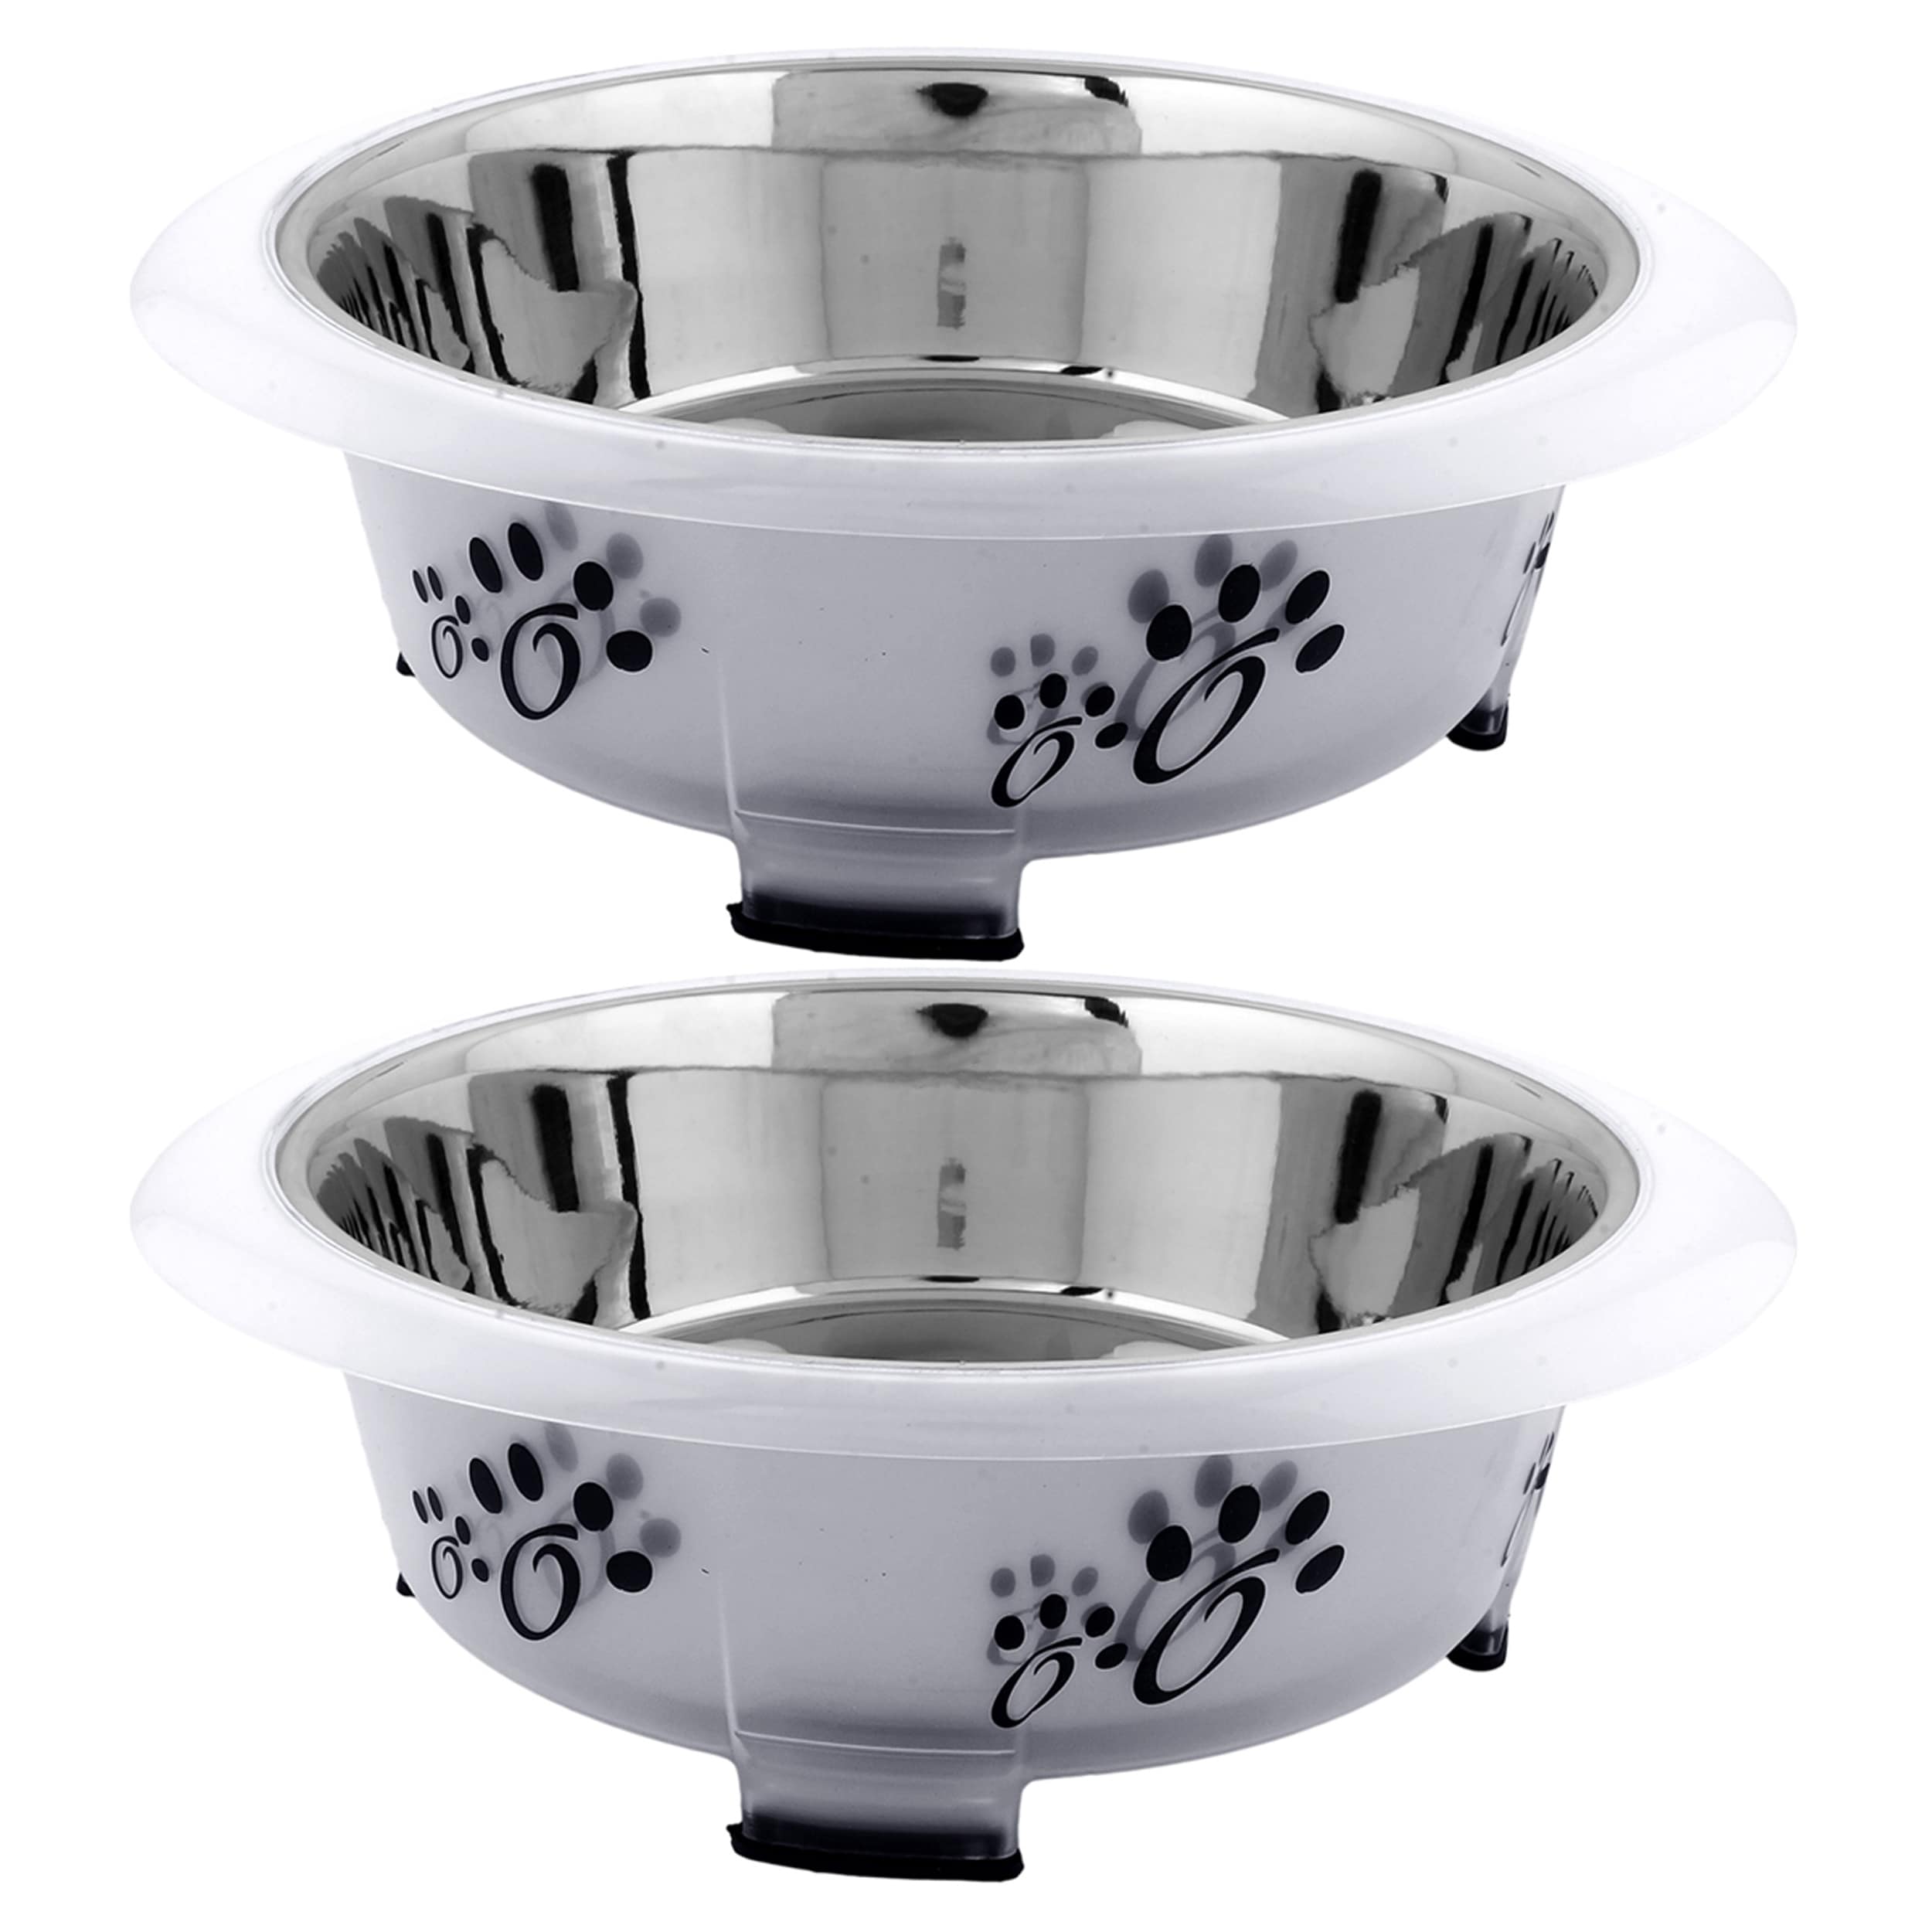 https://ak1.ostkcdn.com/images/products/17759499/Iconic-Pet-Color-Splash-Designer-Oval-Fusion-Bowl-in-Gray-Small-Set-of-2-3f649b7a-89b3-4214-abbf-6806939cc4ac.jpg